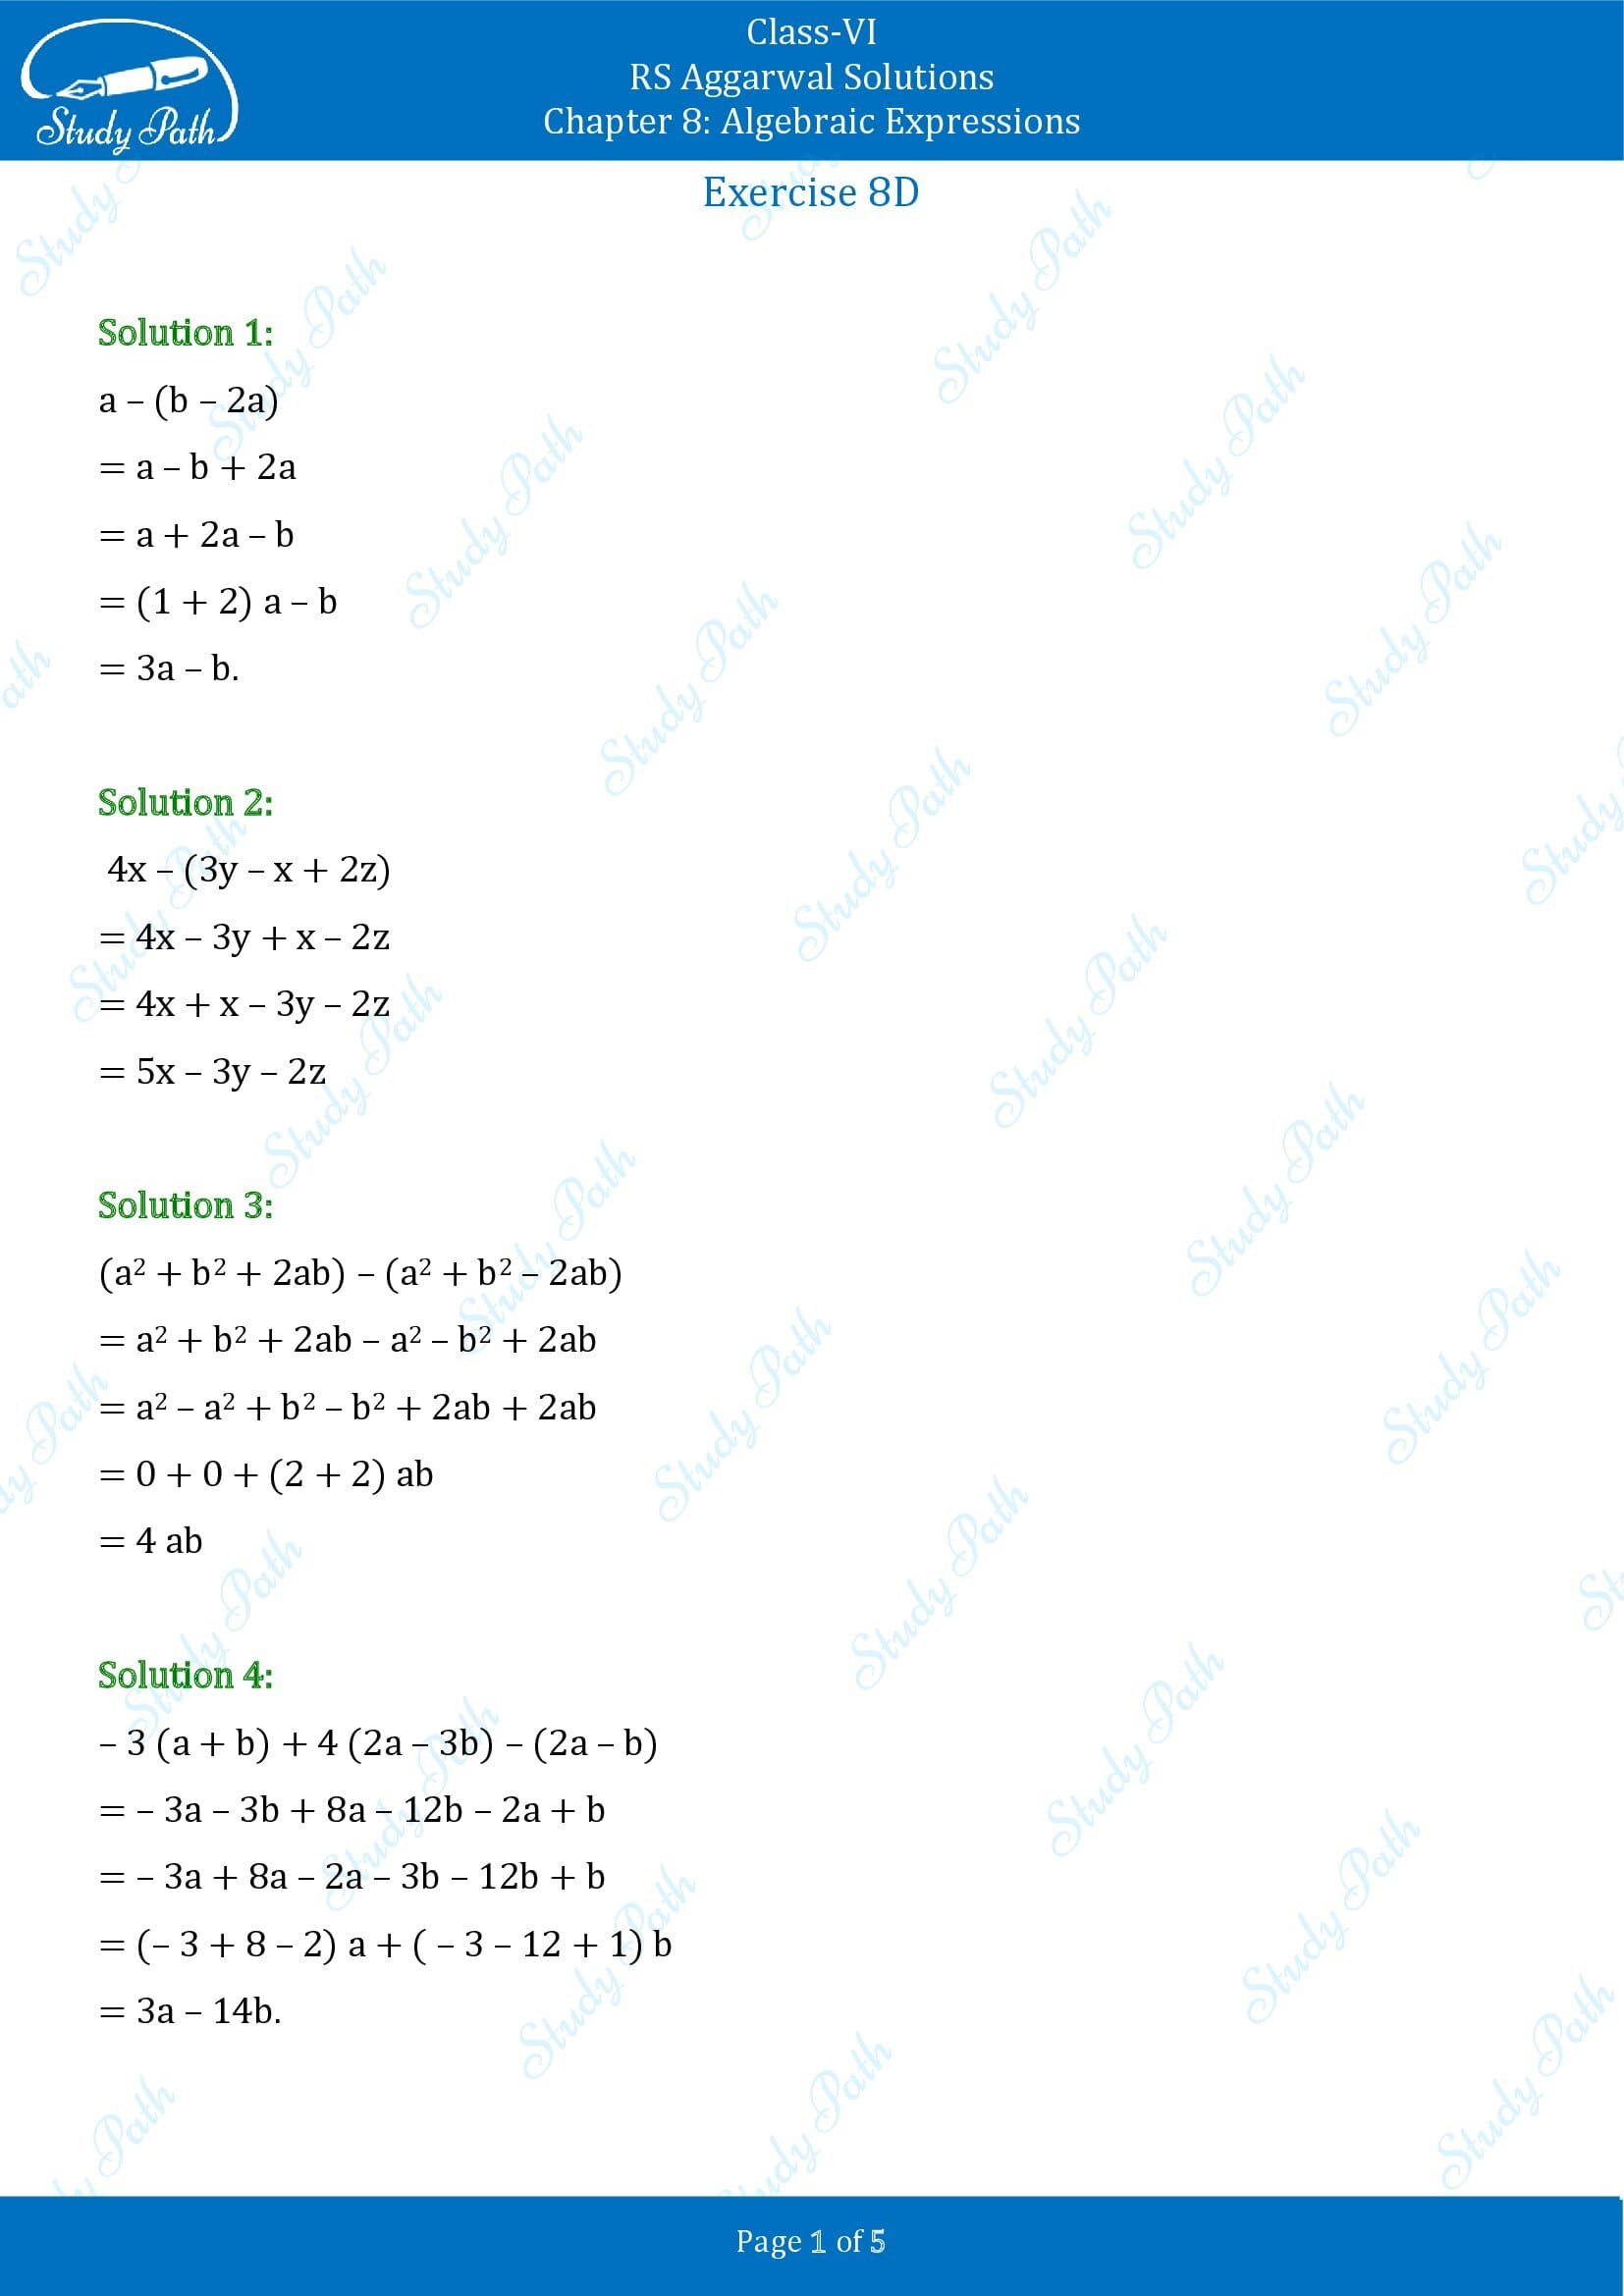 RS Aggarwal Solutions Class 6 Chapter 8 Algebraic Expressions Exercise 8D 0001